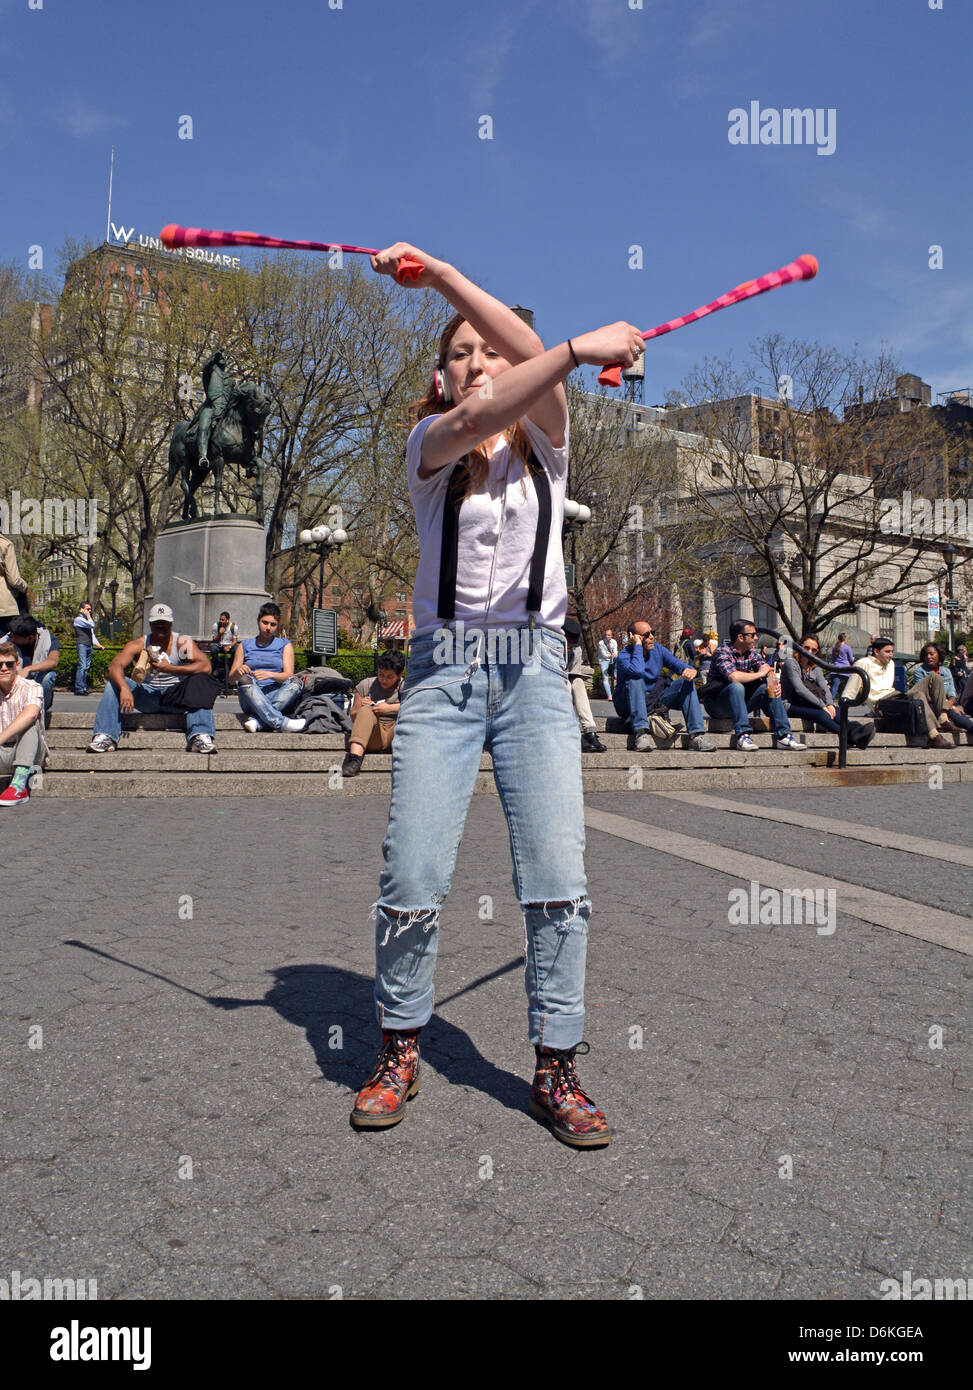 Young lady performing POI performance art in Union Square Park in New York City. Stock Photo